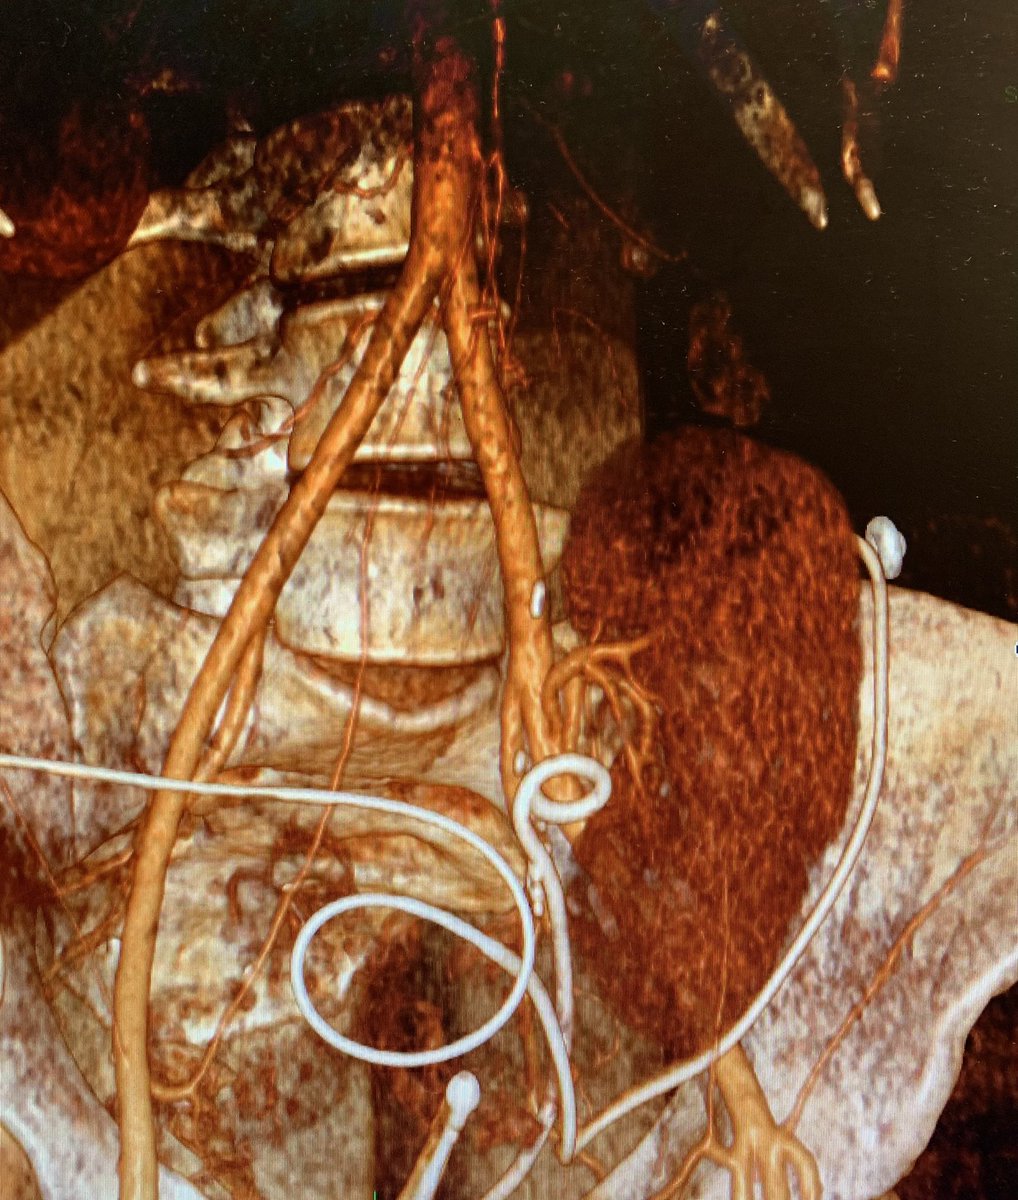 Full robotic (or robotic+open) autotransplantation is a great technique to treat extended iatrogenic ureteral avulsion. This week’s case with a tricky reconstruction of 2 small arteries. (With patient’s permission) . Favorite approach > ileal ureter according to @MejeanArnaud .